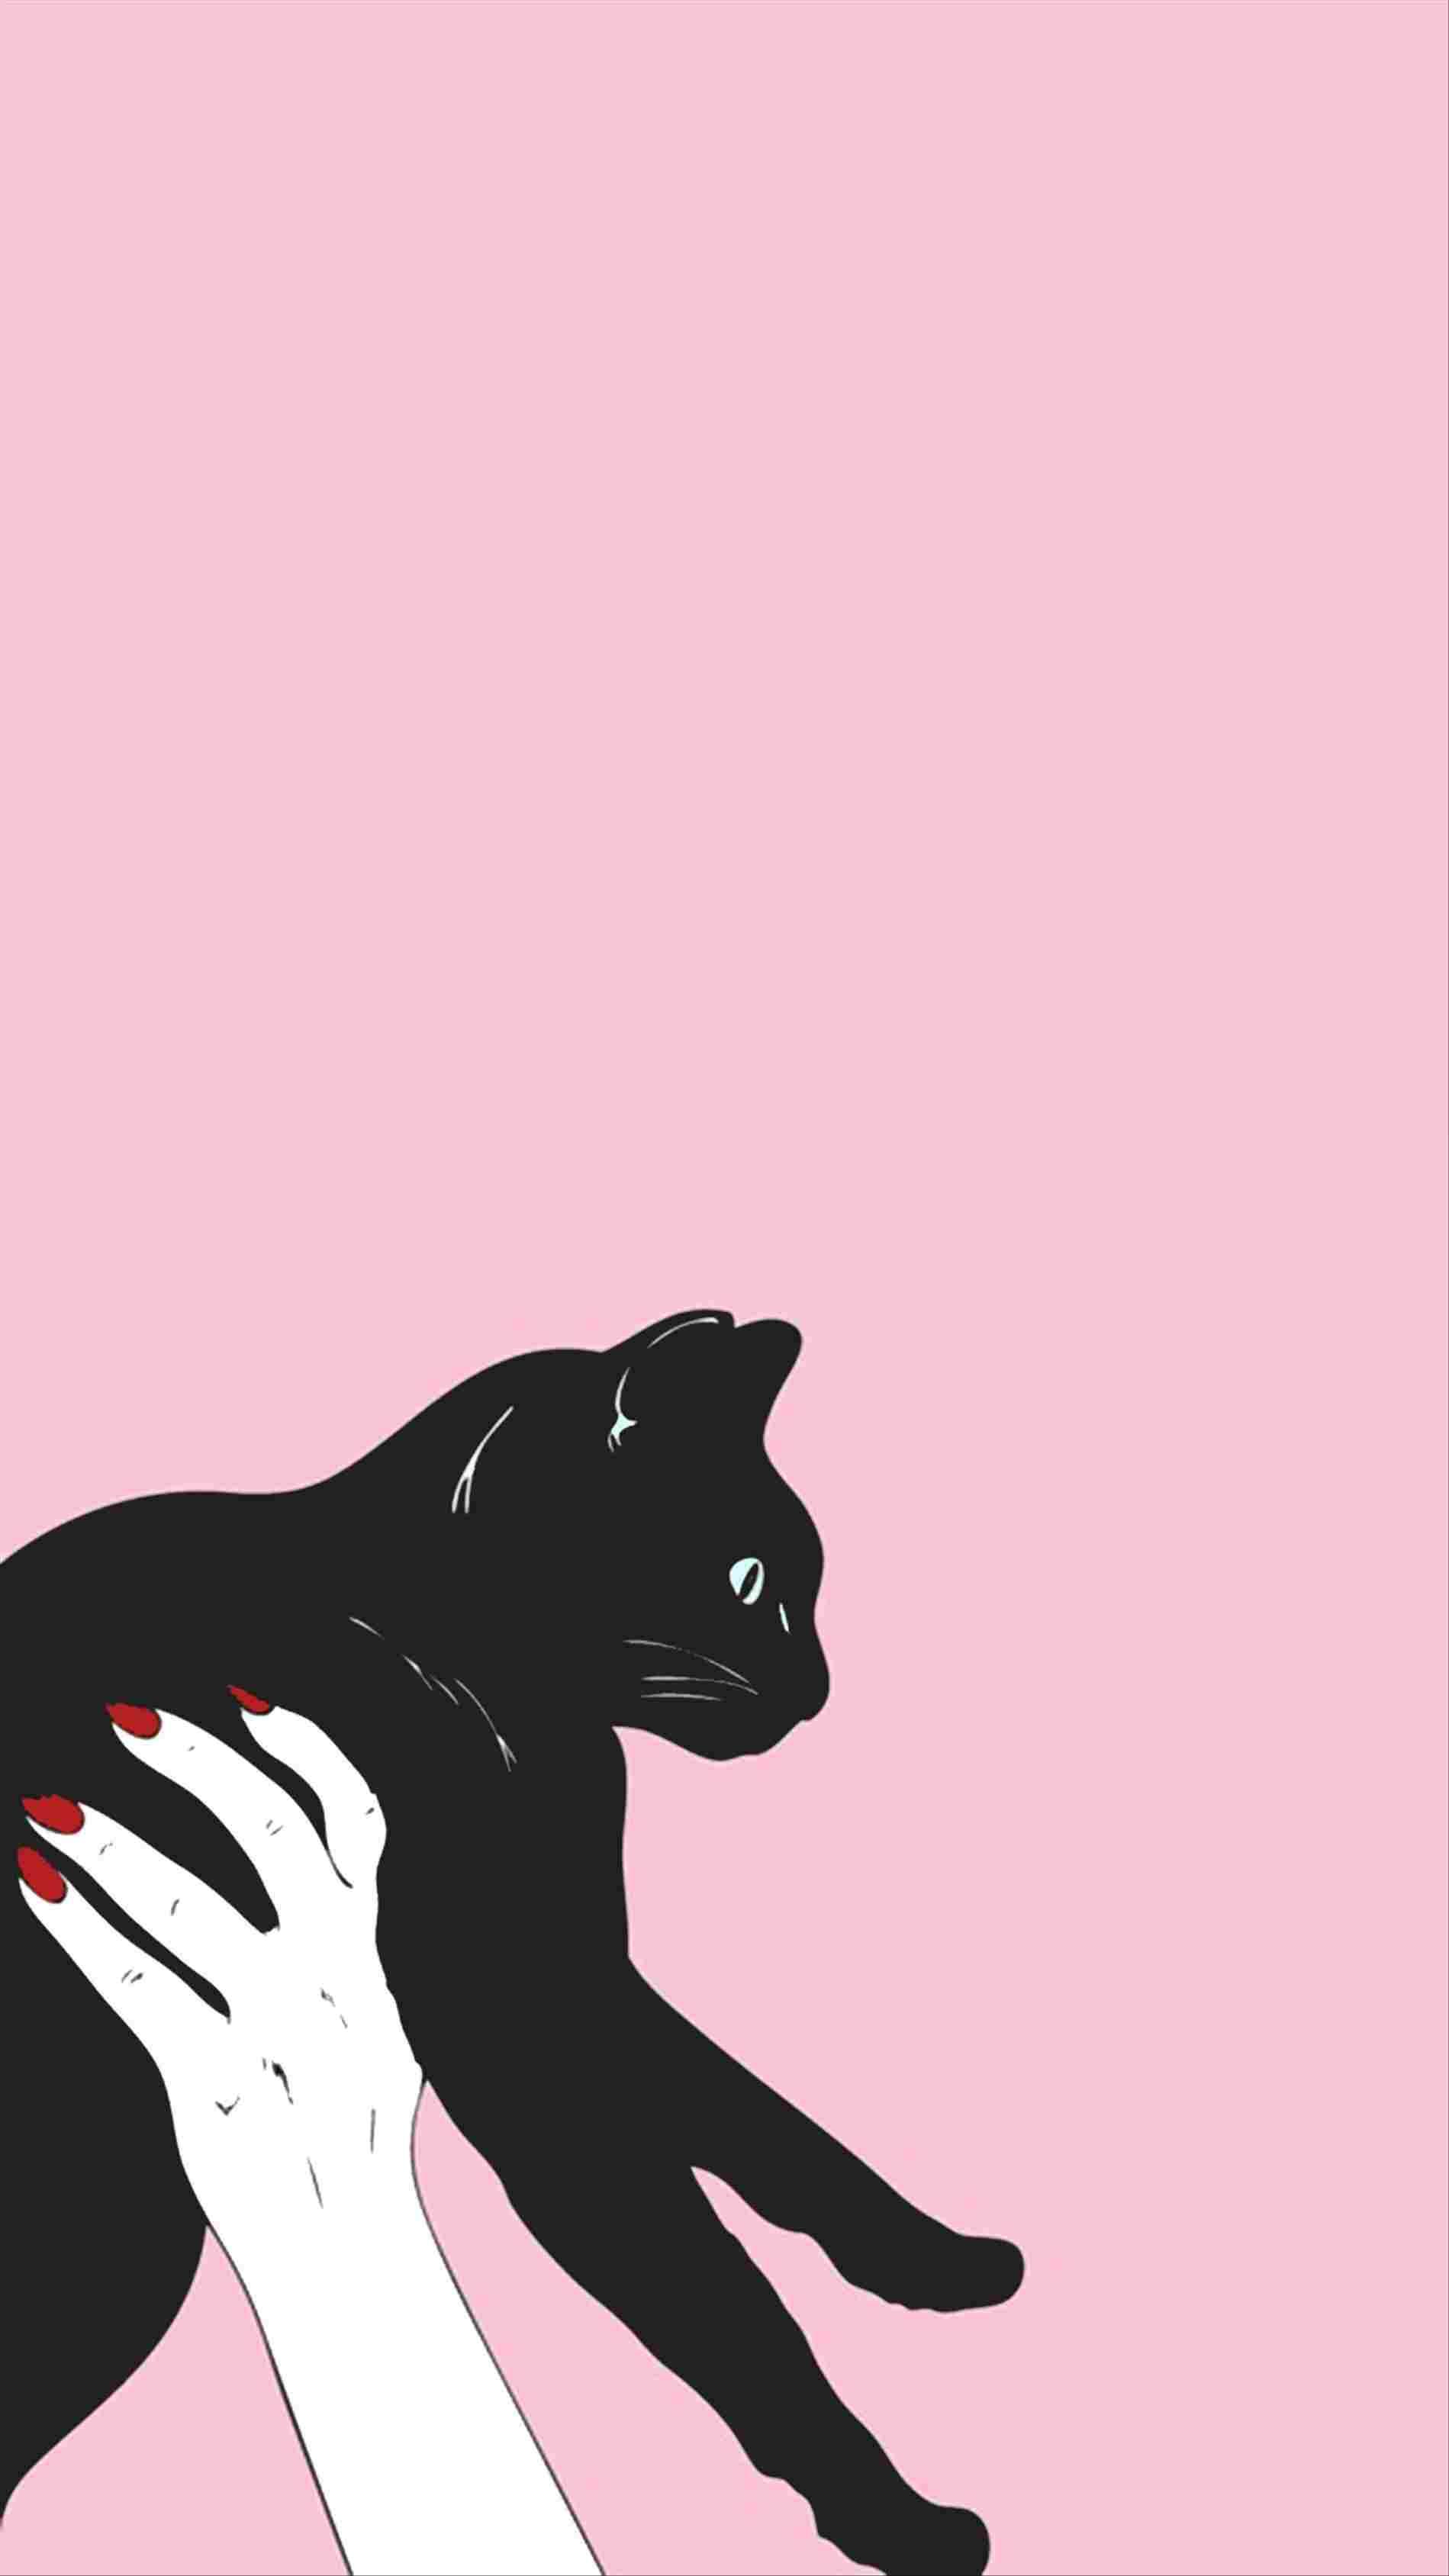 A black cat is being held by a pair of hands with red nail polish. - Cat